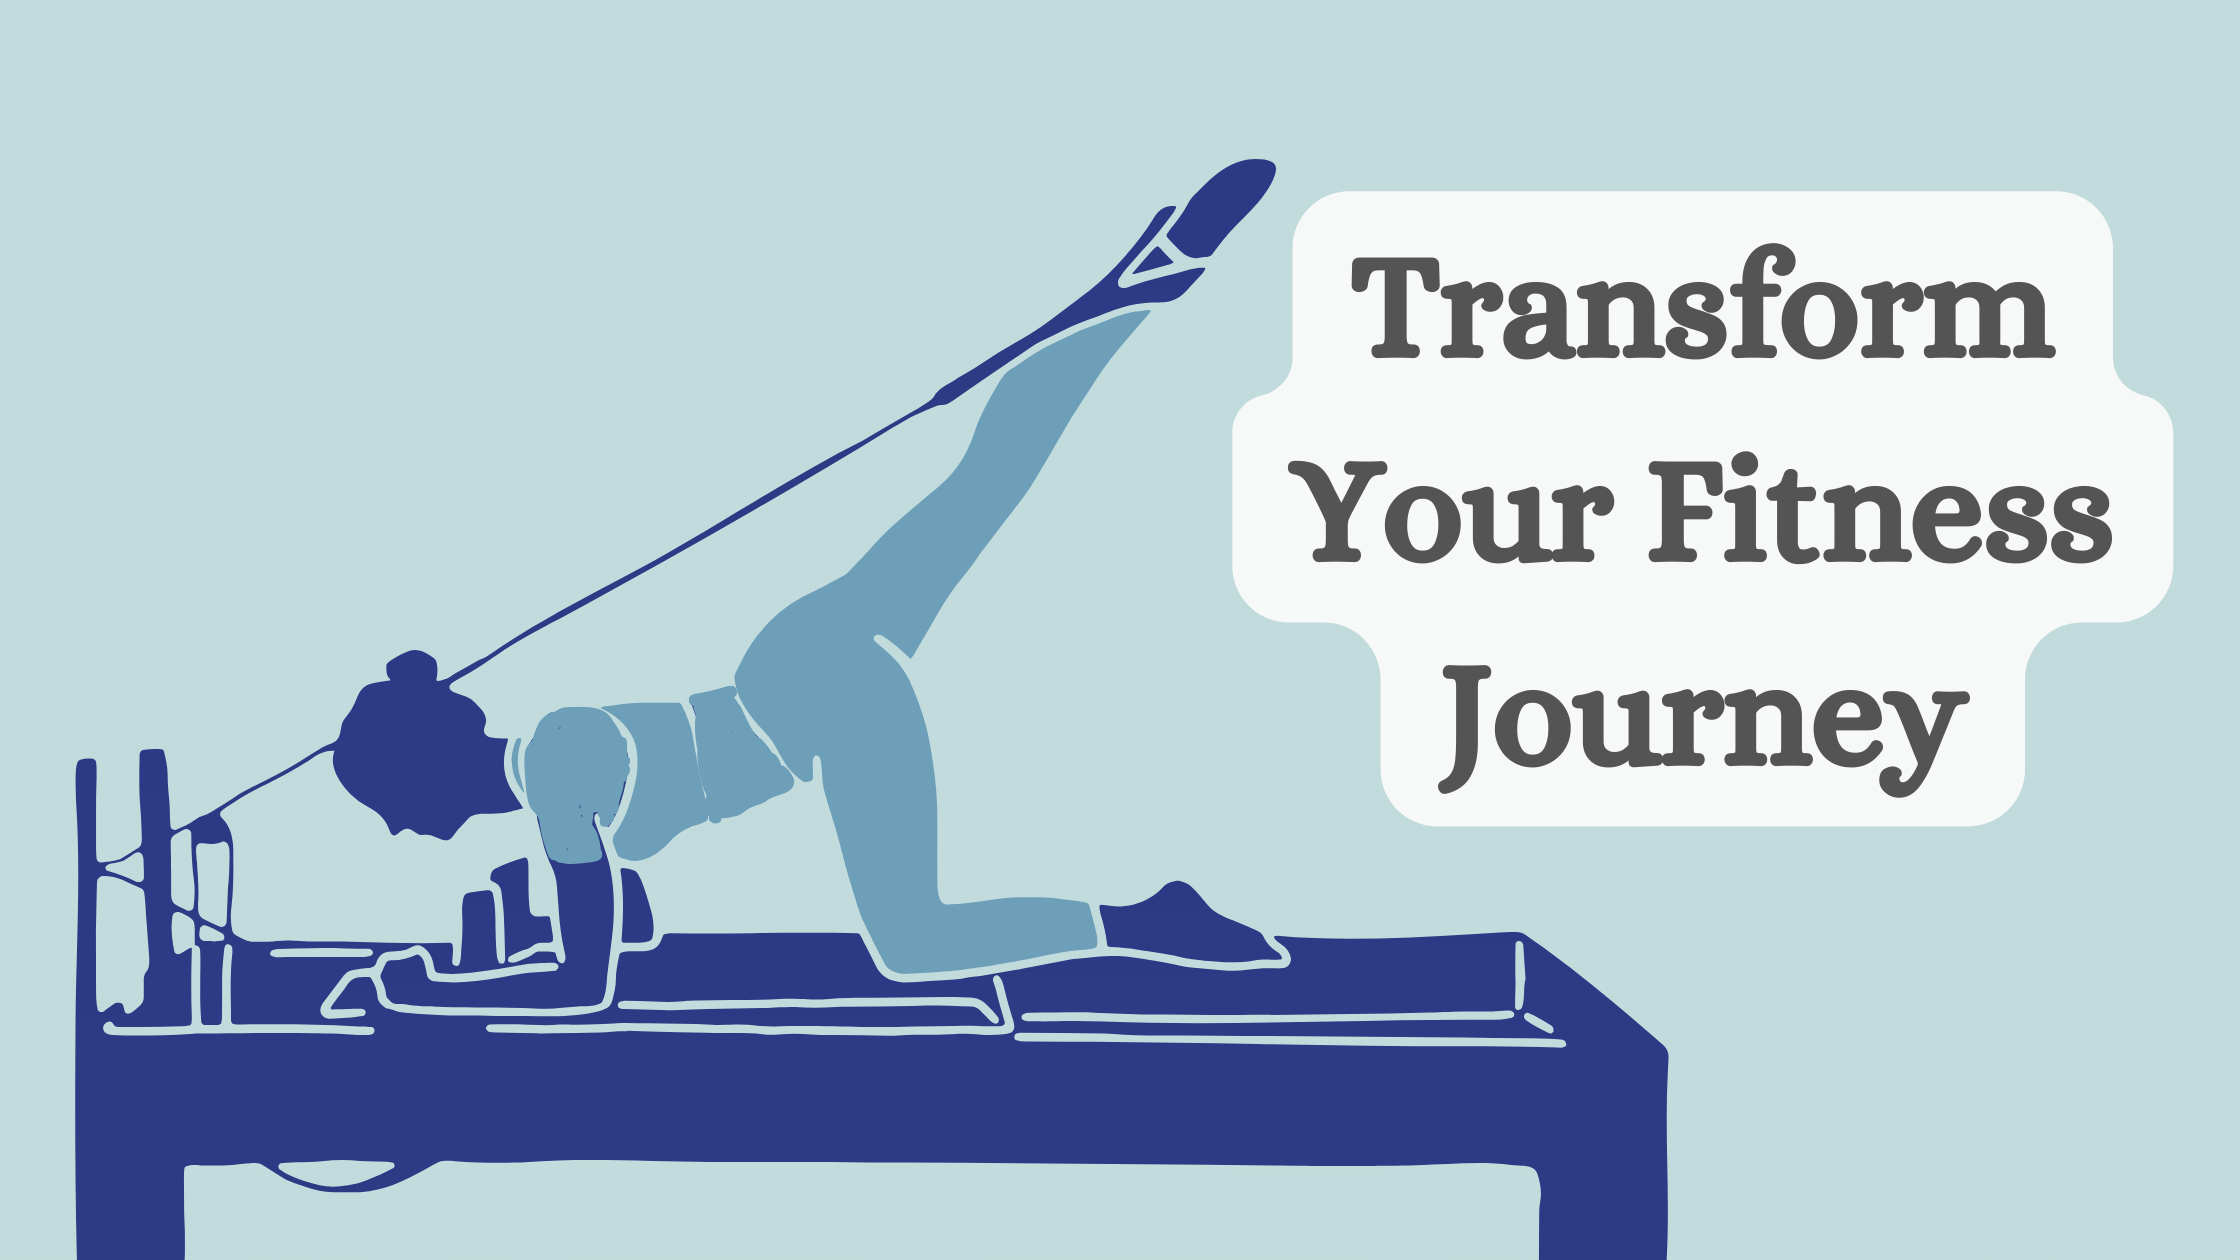 Transform Your Fitness Journey